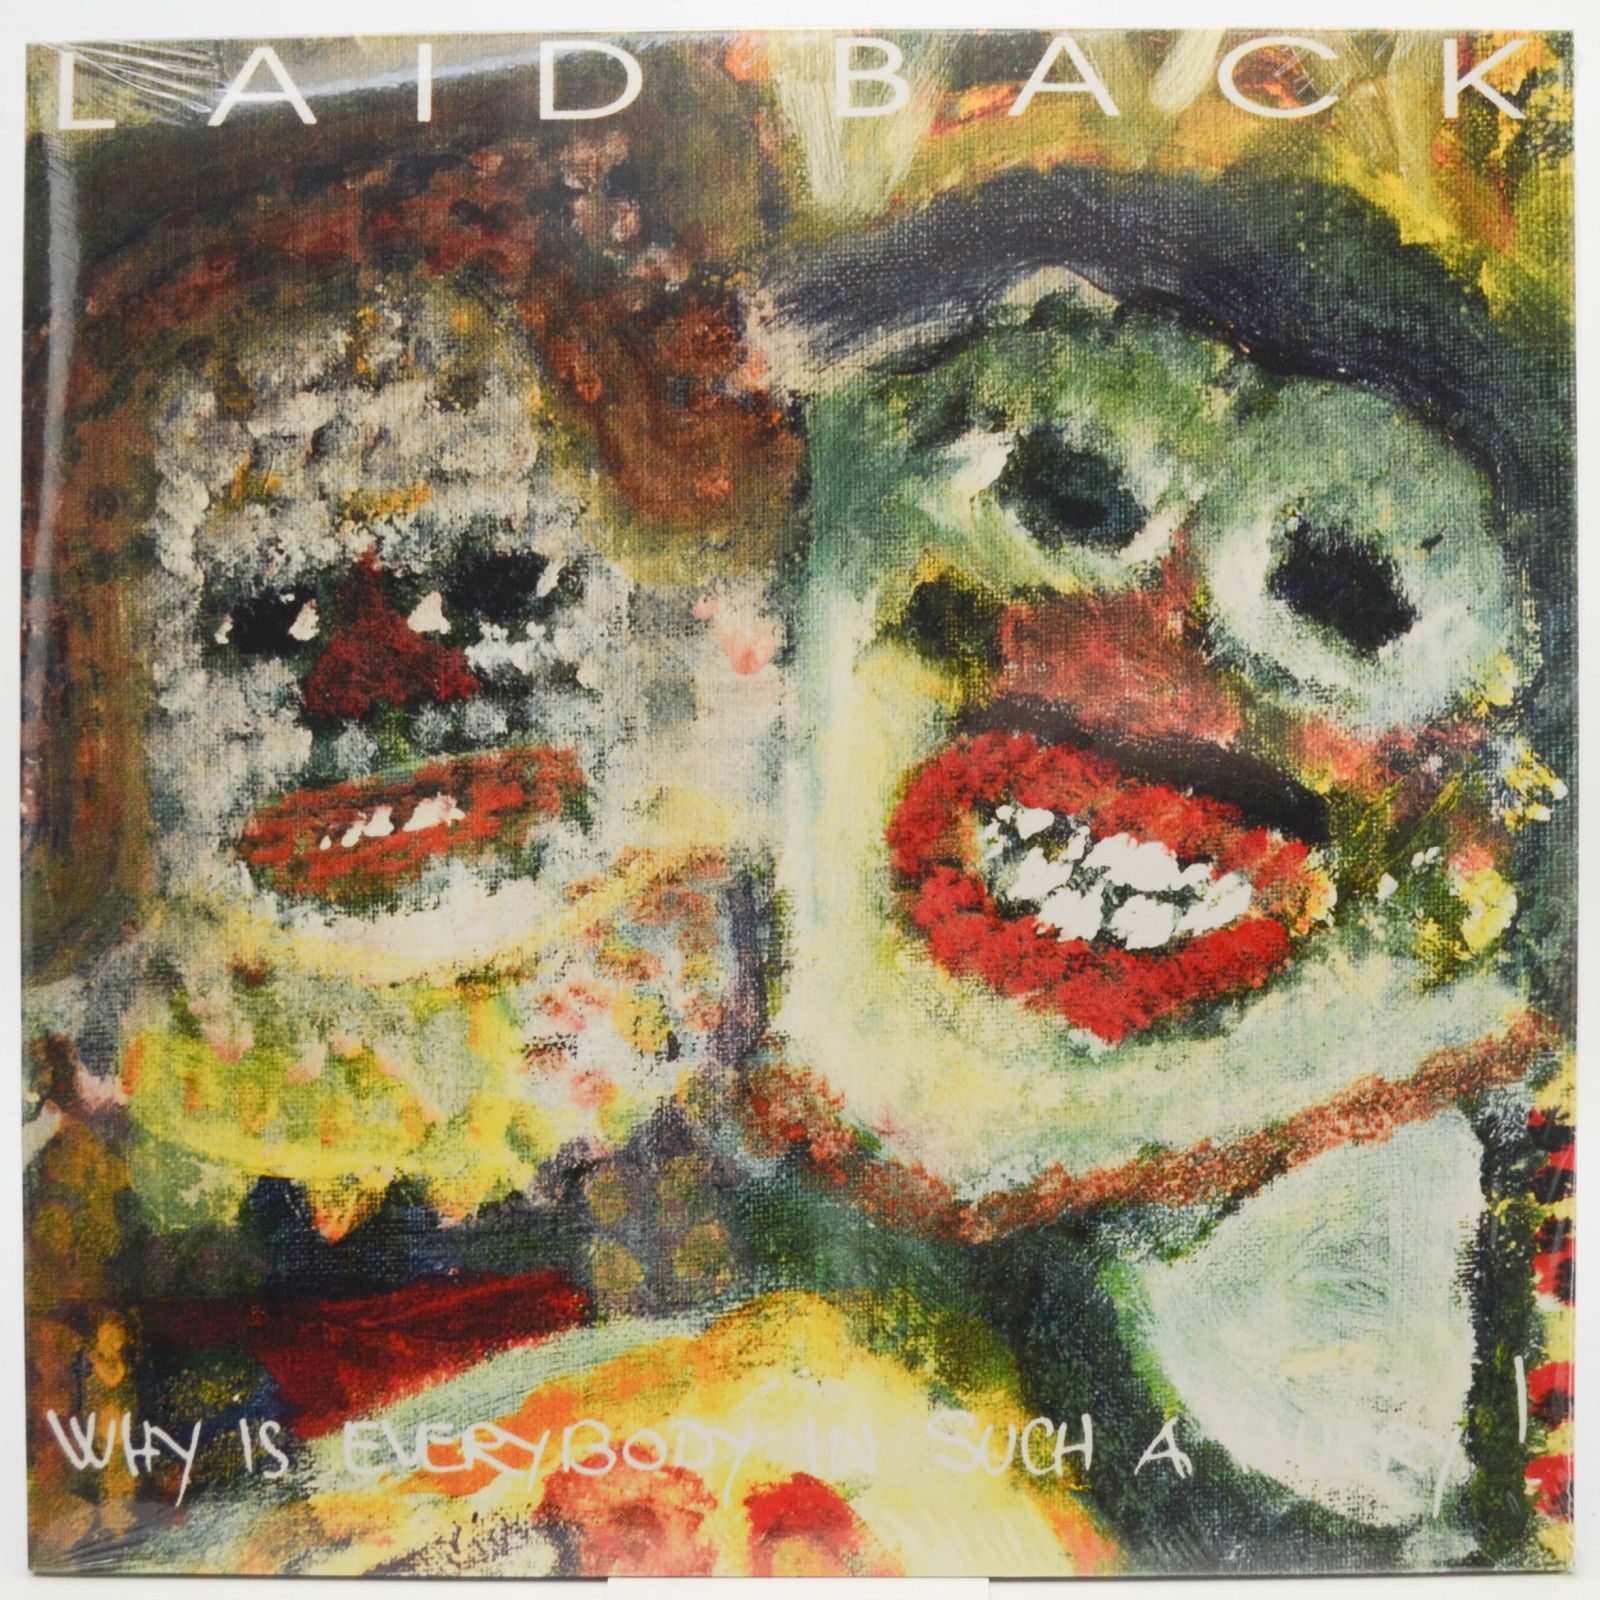 Laid Back — Why Is Everybody In Such A Hurry!, 1993